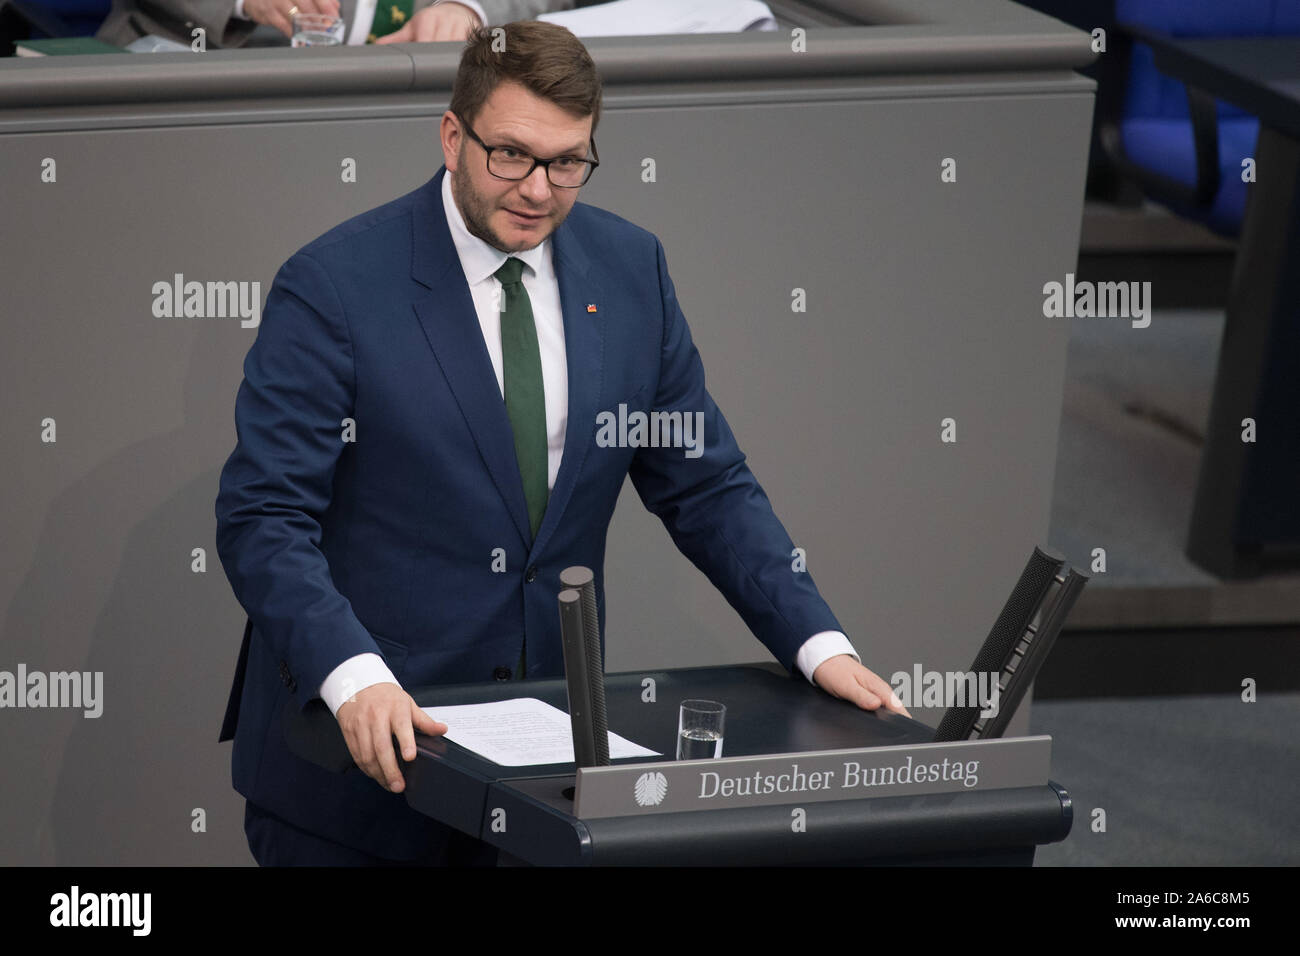 Berlin, Germany. 25th Oct, 2019. Marian Wendt (CDU/CSU) speaks at the plenary session of the German Bundestag. The topic is 'state proportional representation at federal authorities'. Credit: Jörg Carstensen/dpa/Alamy Live News Stock Photo